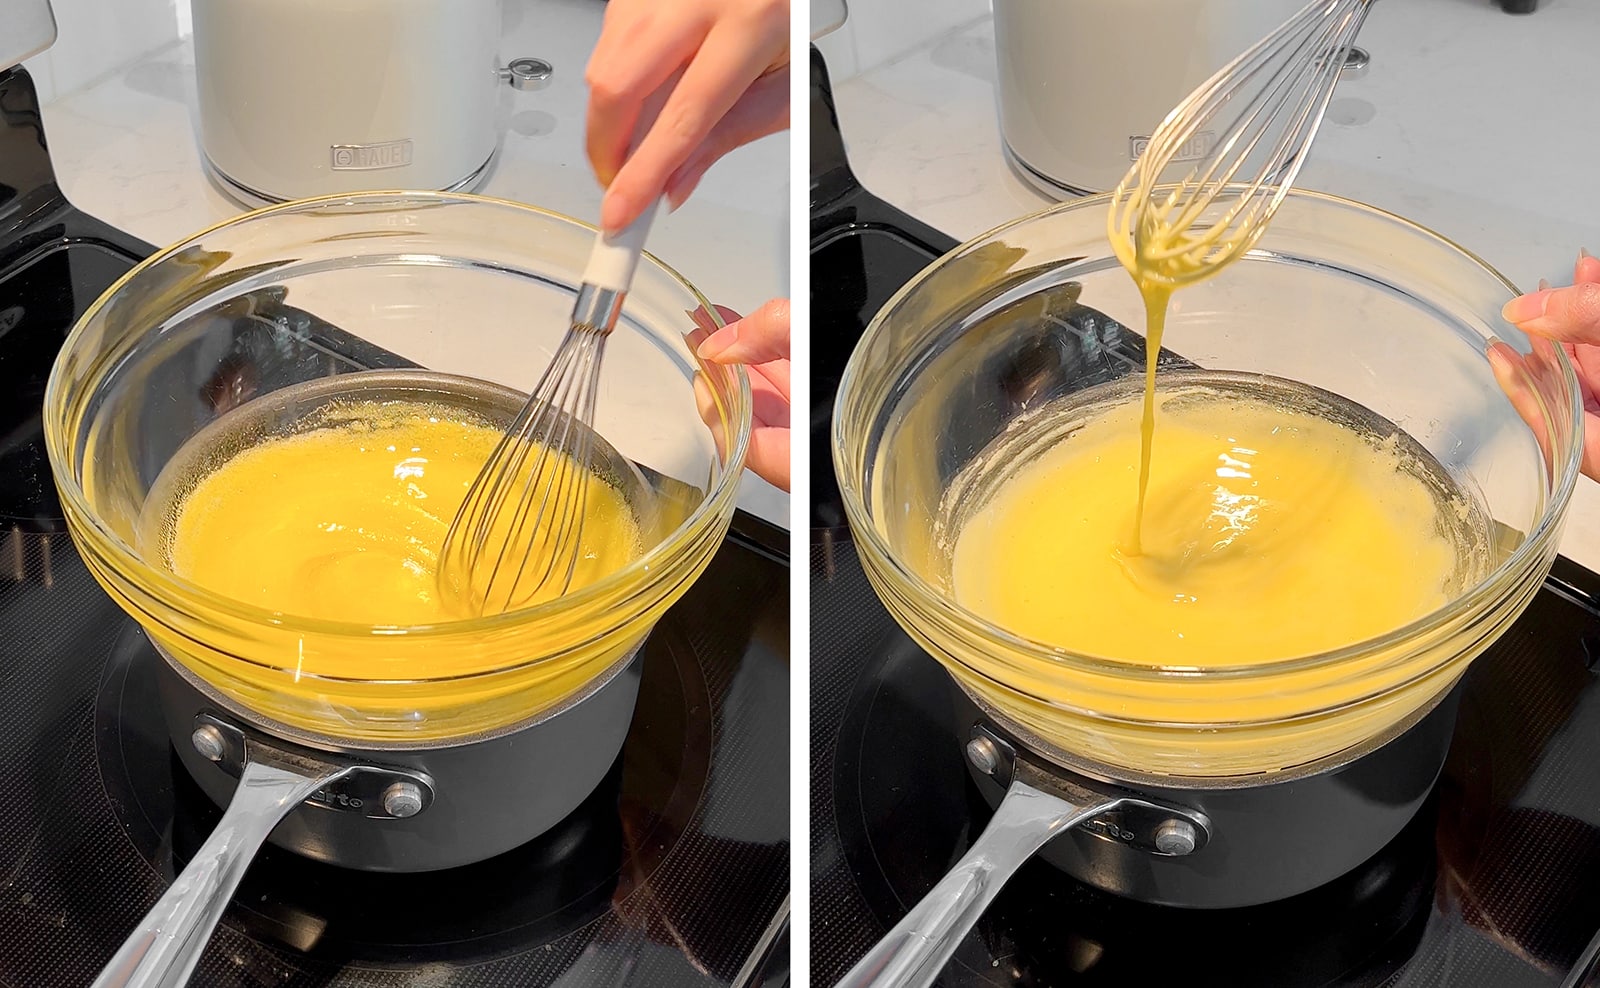 Left to right: whisking egg mixture in double boiler, egg mixture dripping off whisk into bowl.